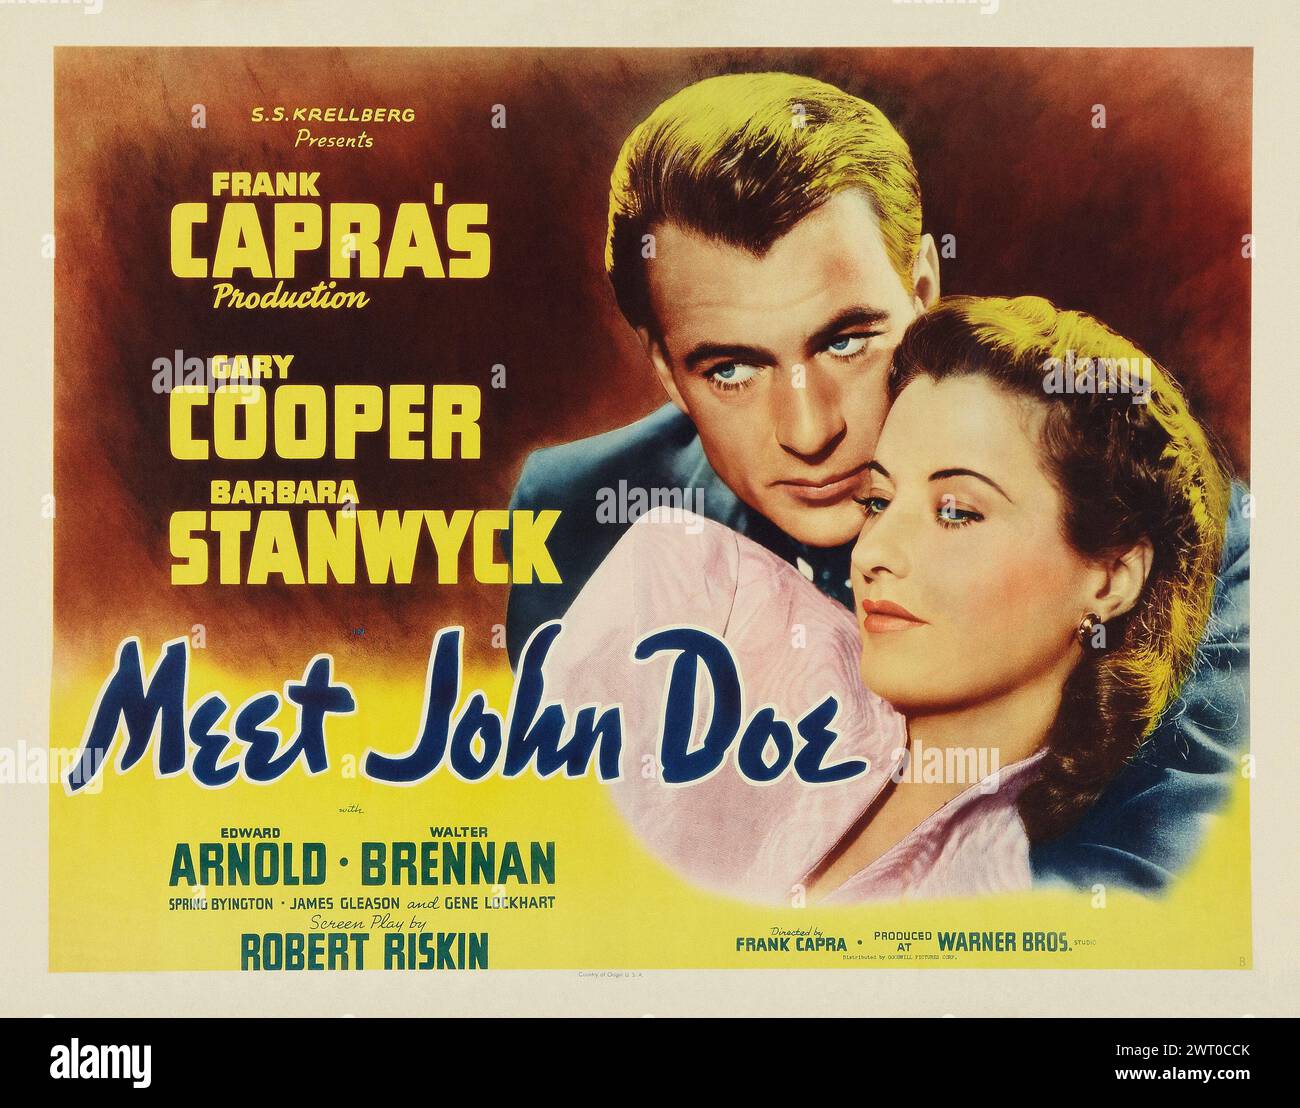 Frank Capra's Meet John Doe (Warner Brothers, 1941). Old film poster. Style B, featuring 1940s movie stars Gary Cooper and Barbara Stanwyck Stock Photo